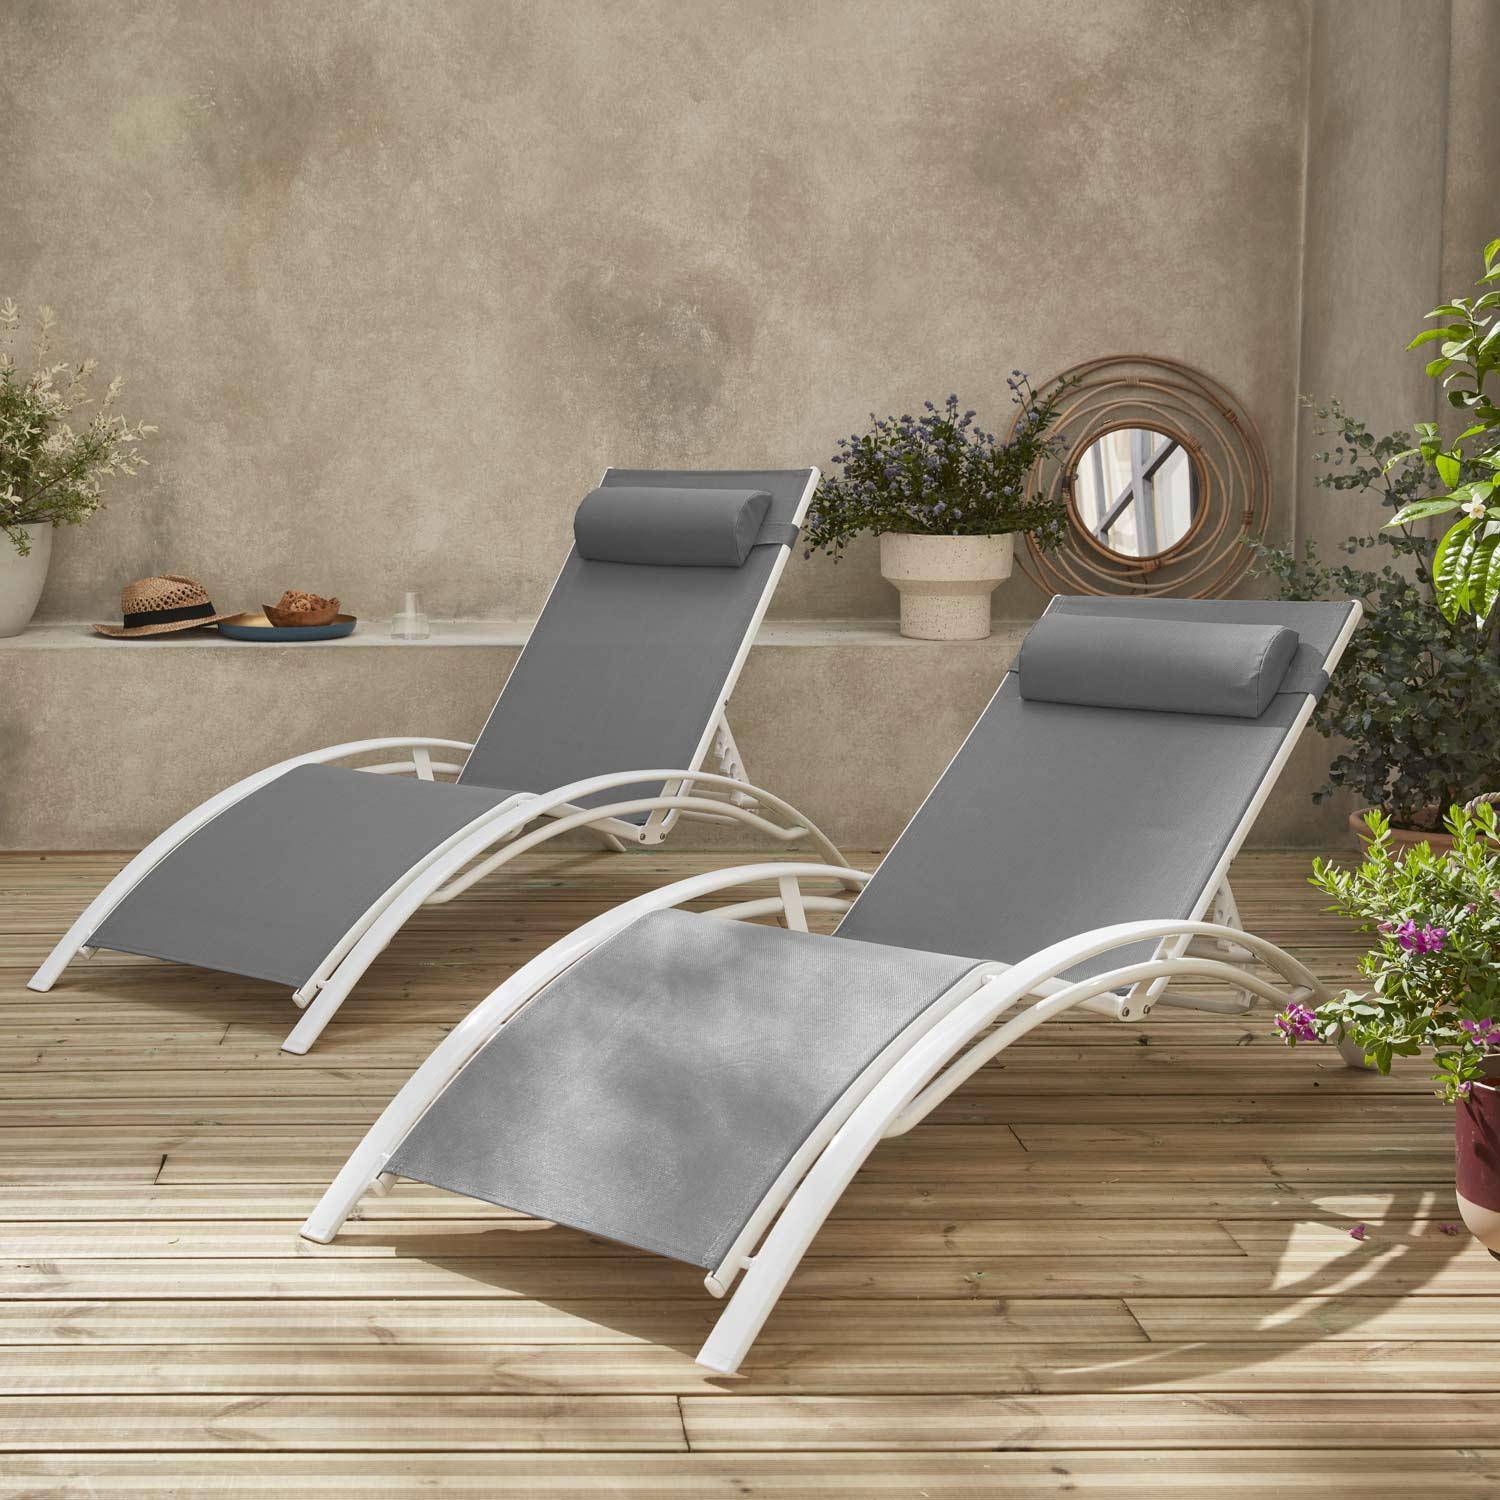 Pair of aluminium and textilene sun loungers, 4 reclining positions, headrest included, stackable - Louisa - White frame, Grey textilene Photo2